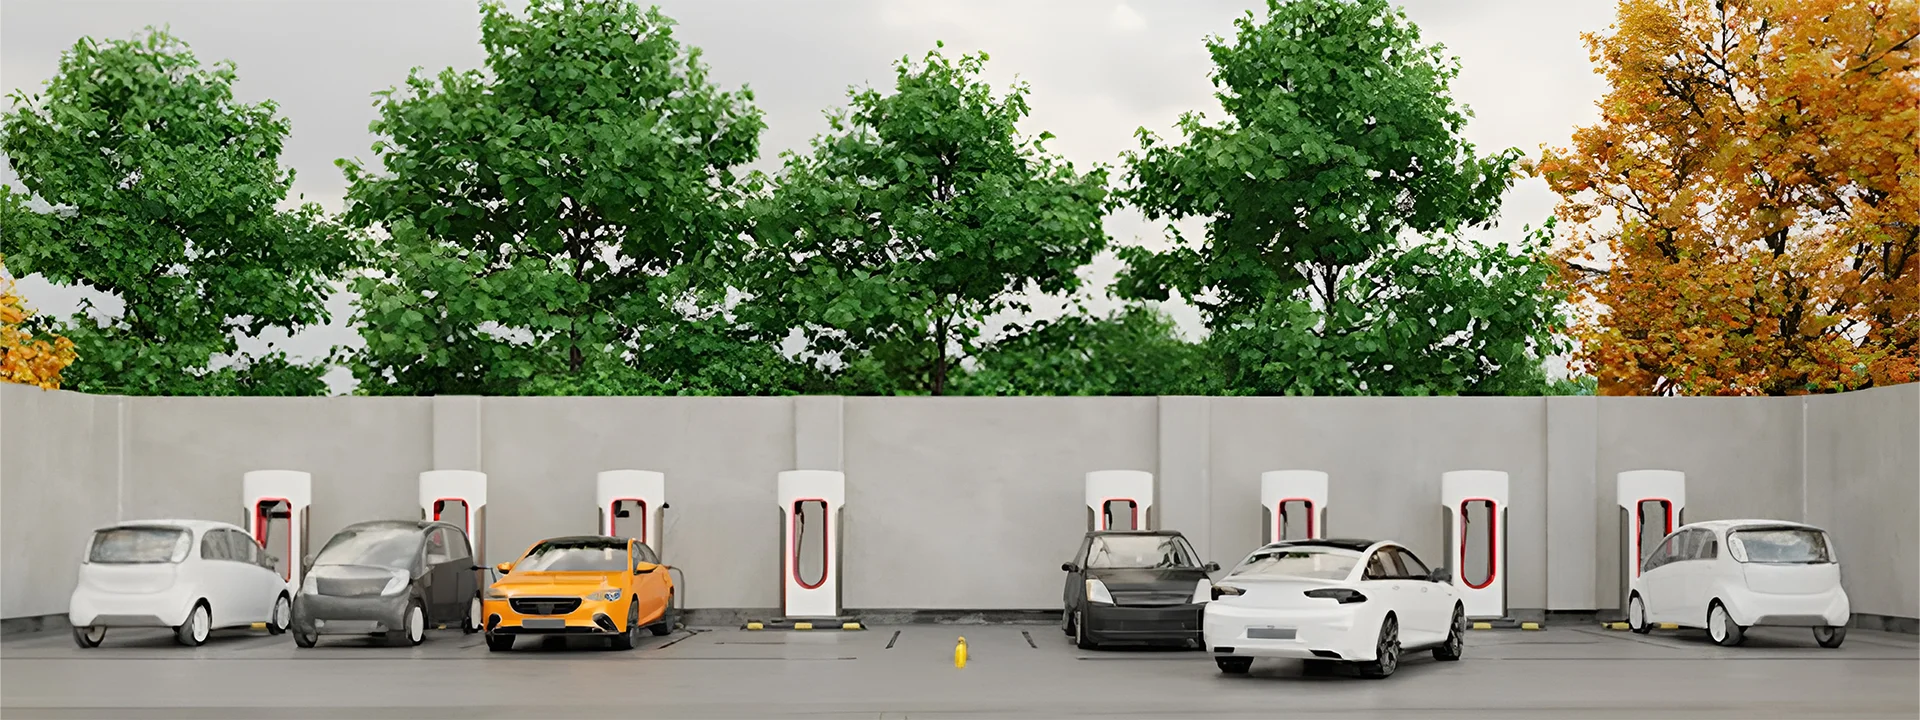 Maintain Electric Vehicle Charging Station